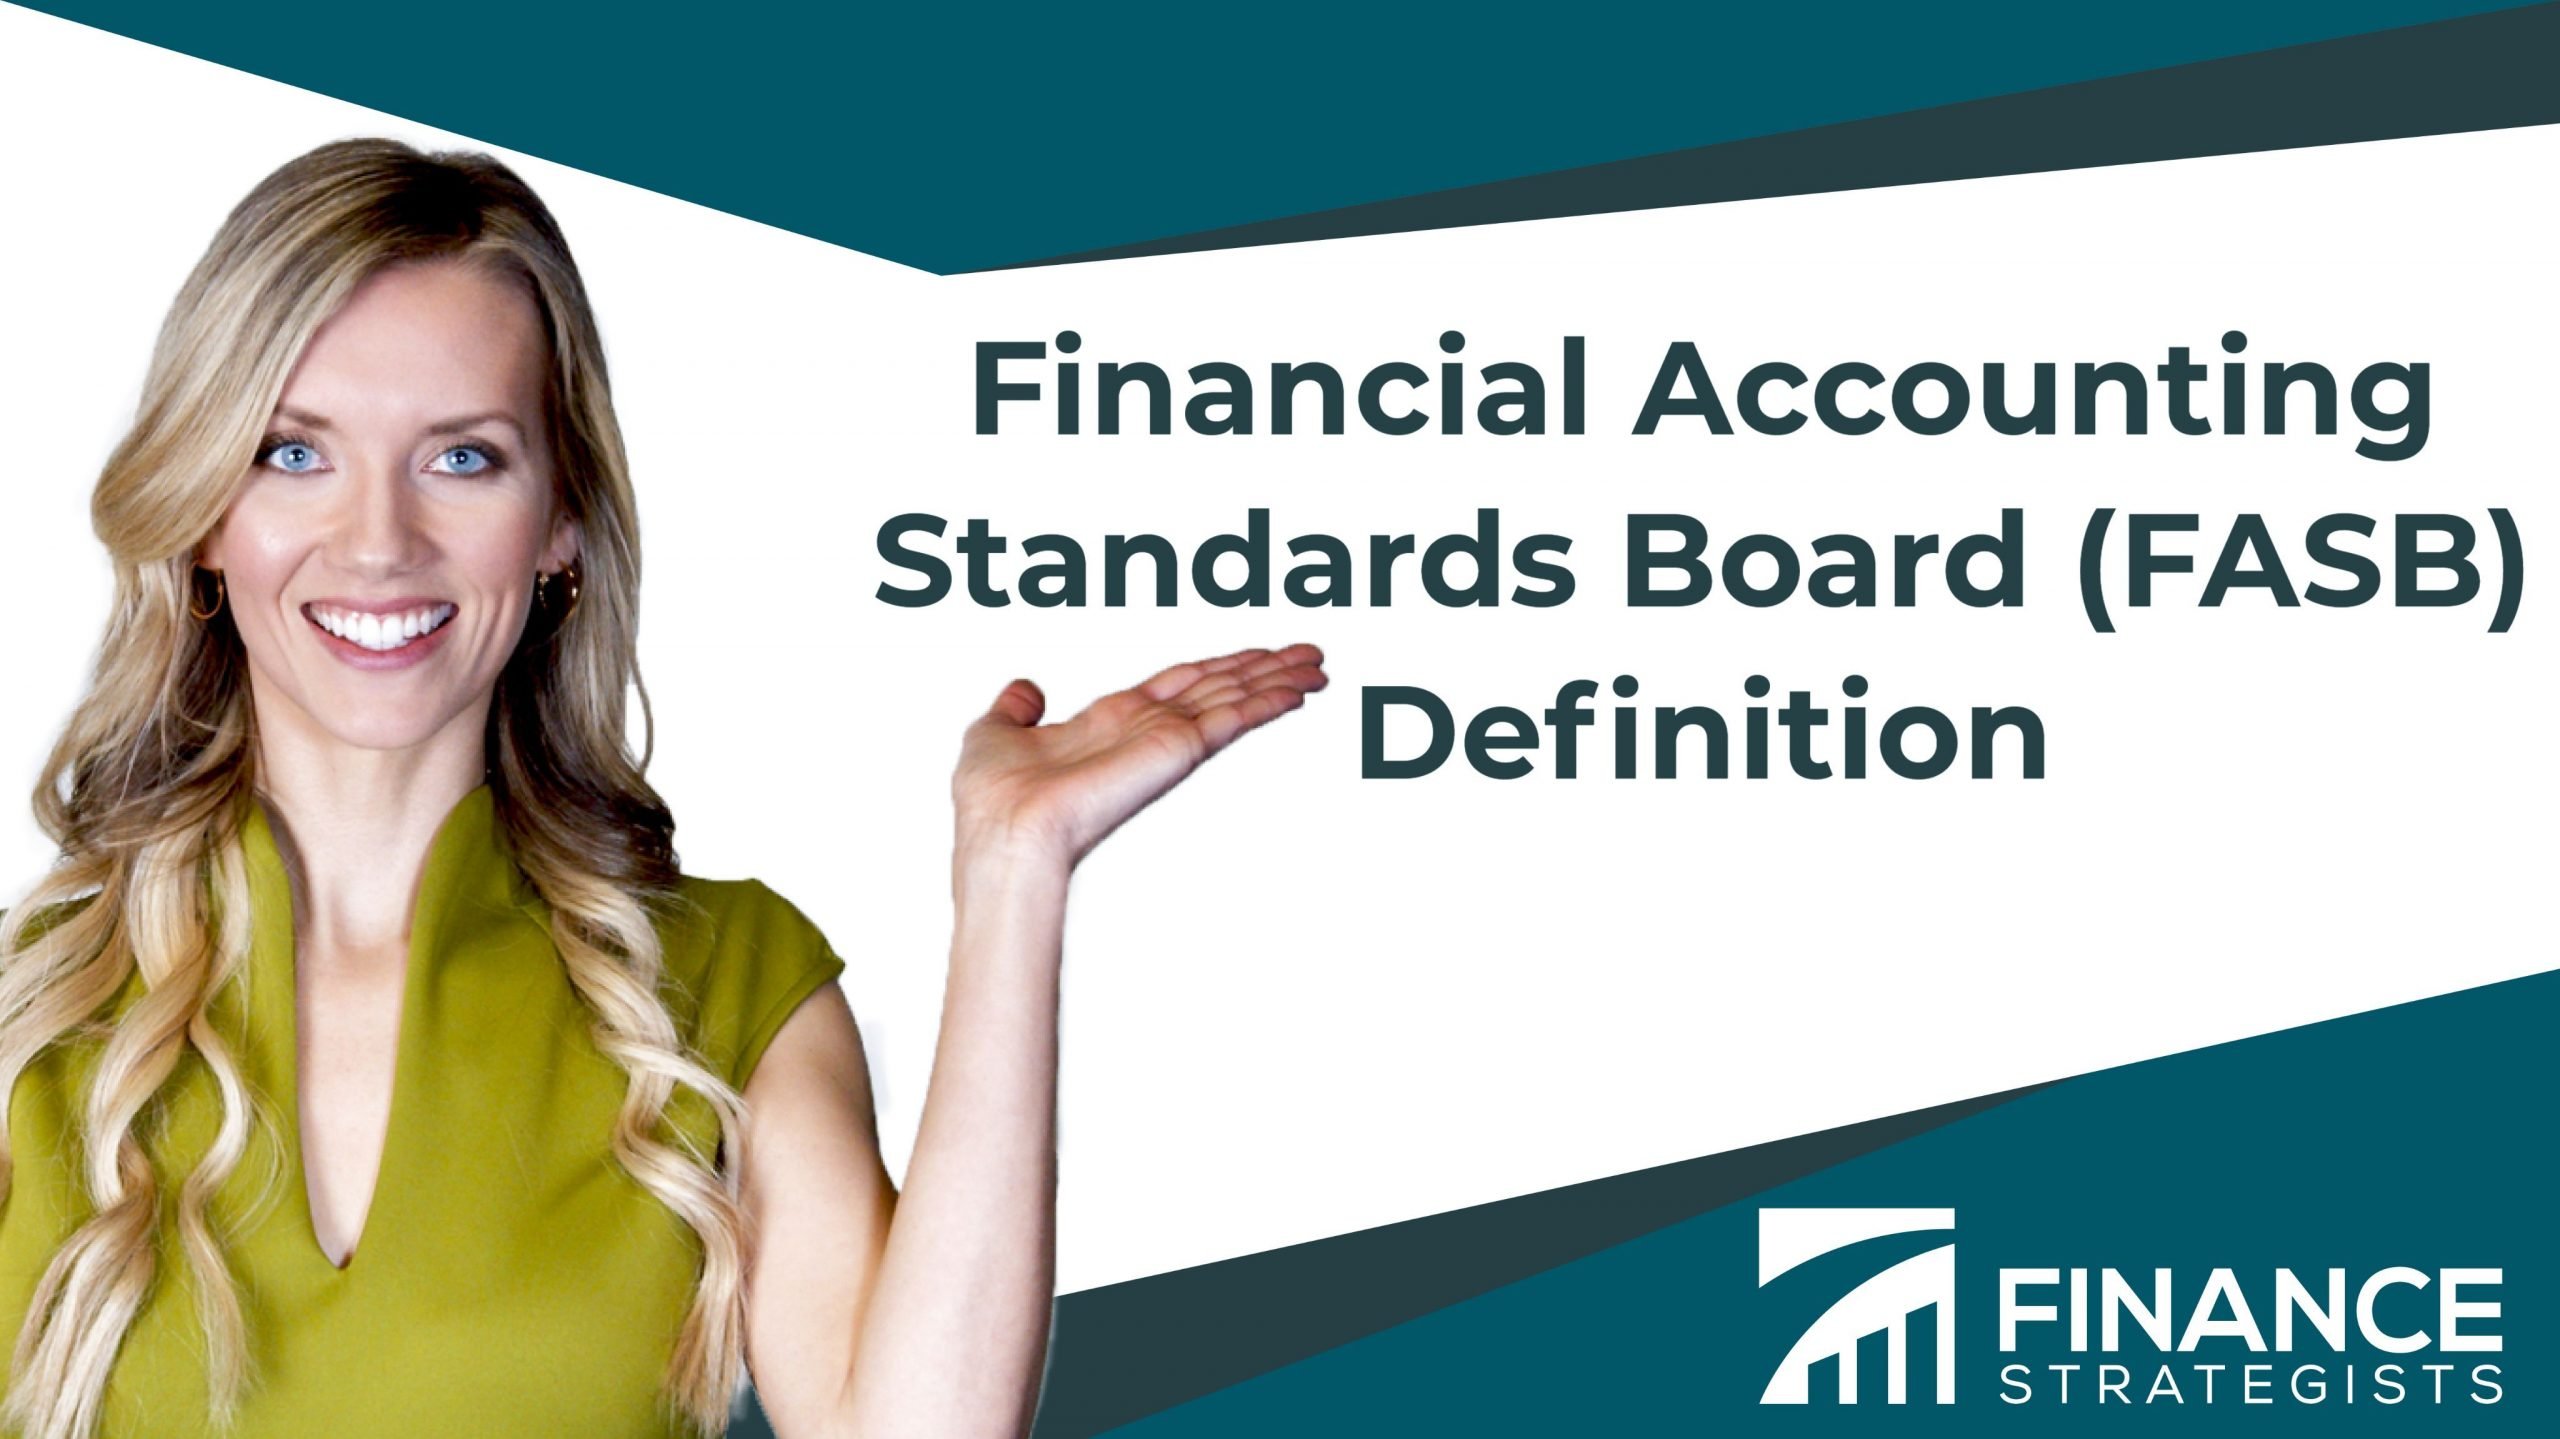 Financial Accounting Standards Board (FASB) Definition